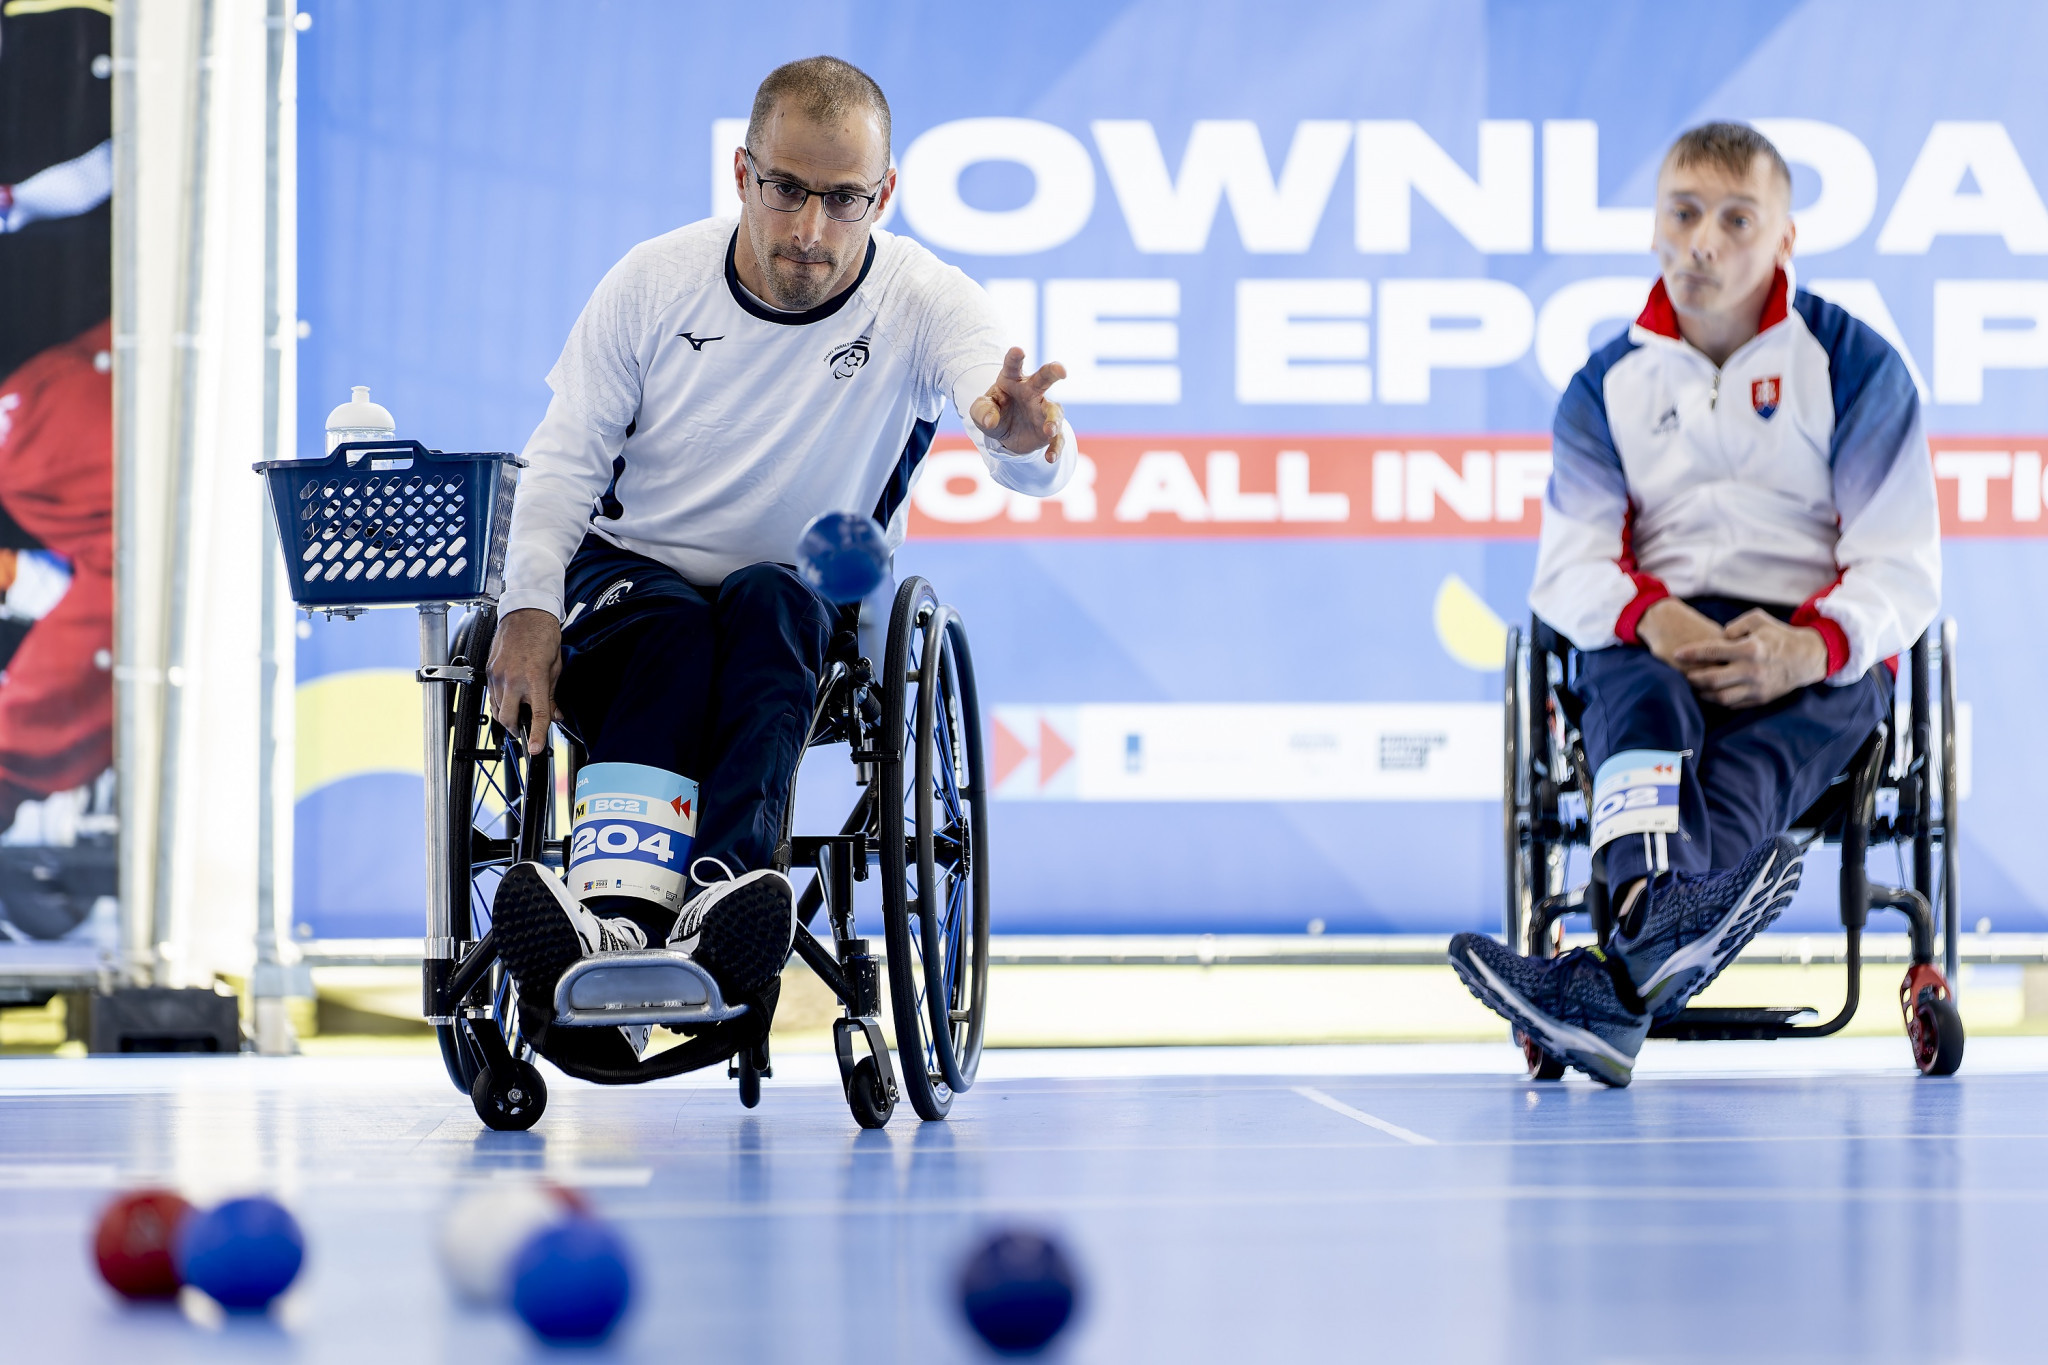 Israel’s Nadav Levi, left, defeated Slovakia’s Robert Mezik, right, 5-4 to clinch the men’s BC2 crown ©EPC